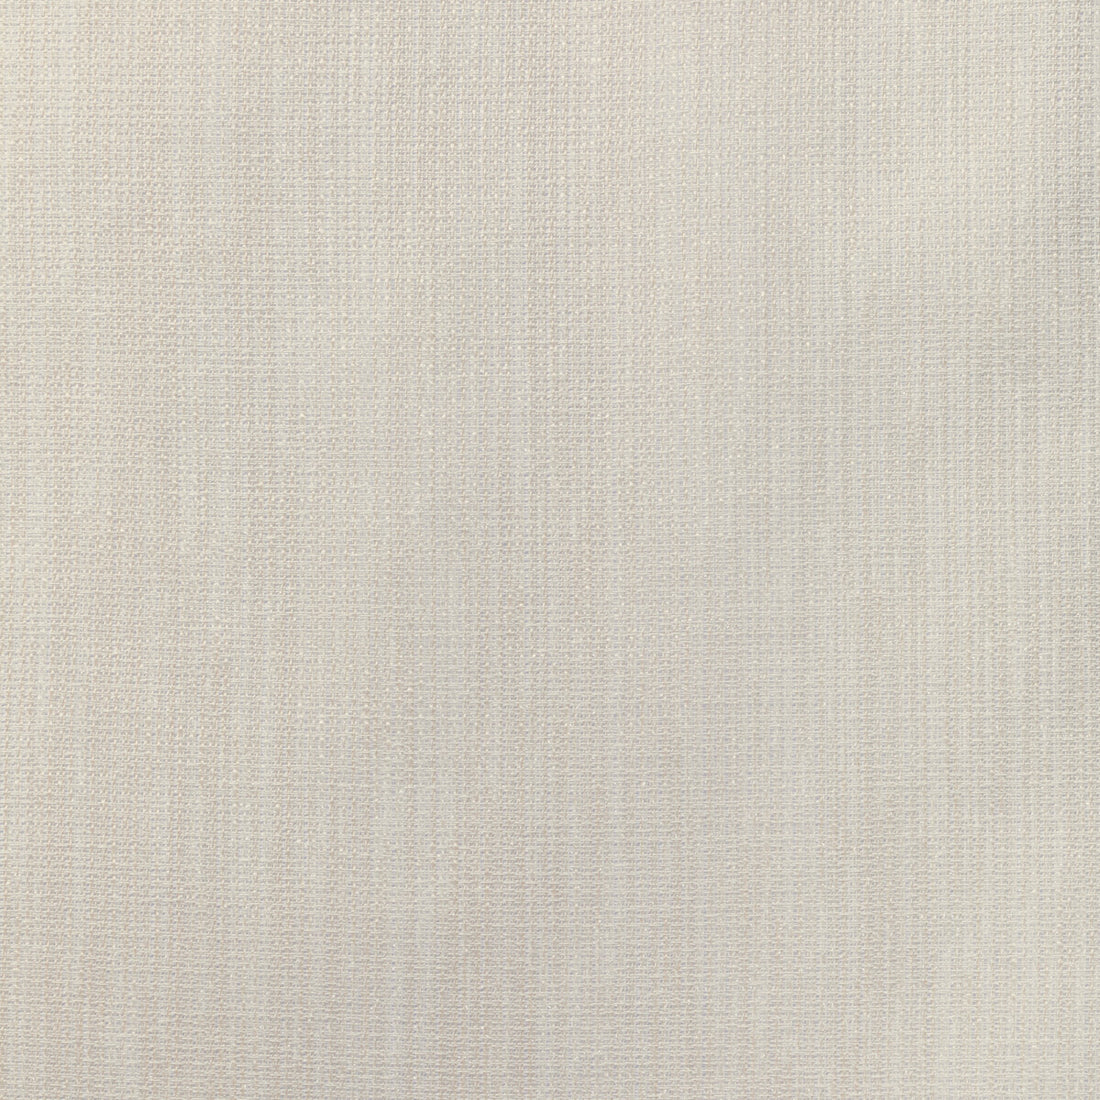 Kravet Contract fabric in 4521-116 color - pattern 4521.116.0 - by Kravet Contract in the Sheer Outlook collection